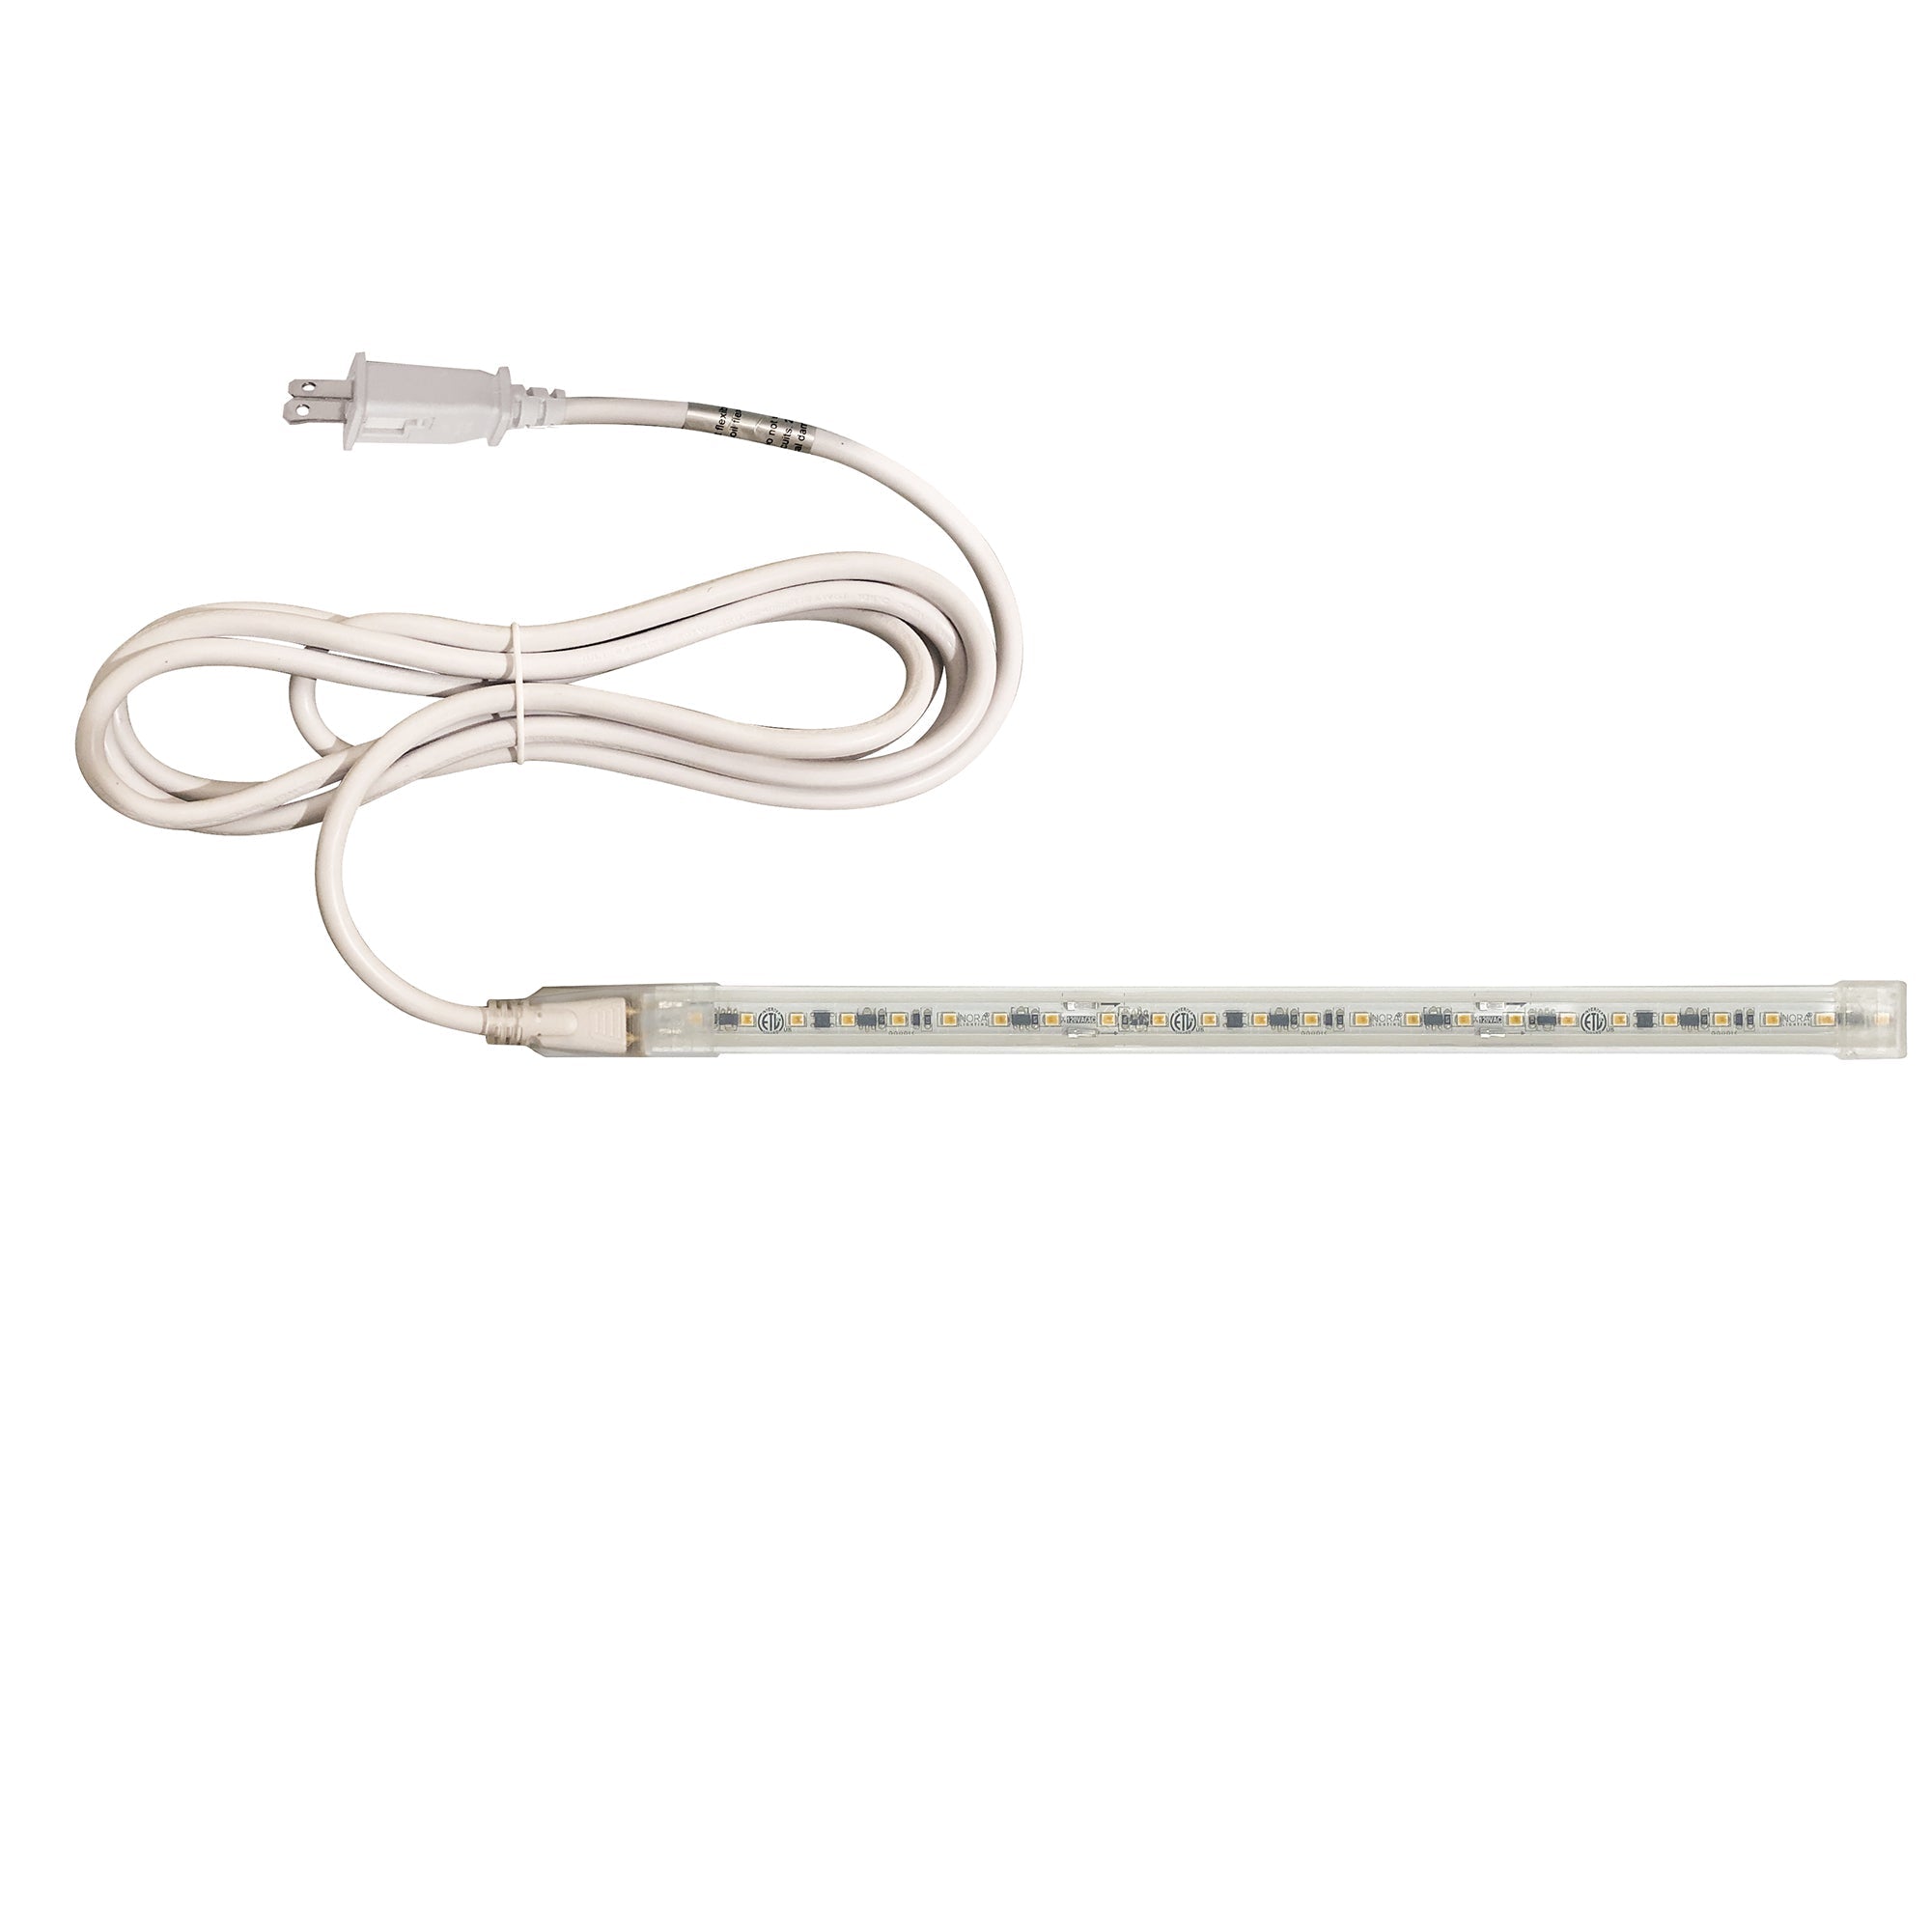 Nora Lighting NUTP13-W71-12-930/CP - Accent / Undercabinet - Custom Cut 71-ft 120V Continuous LED Tape Light, 330lm / 3.6W per foot, 3000K, w/ Mounting Clips and 8' Cord & Plug